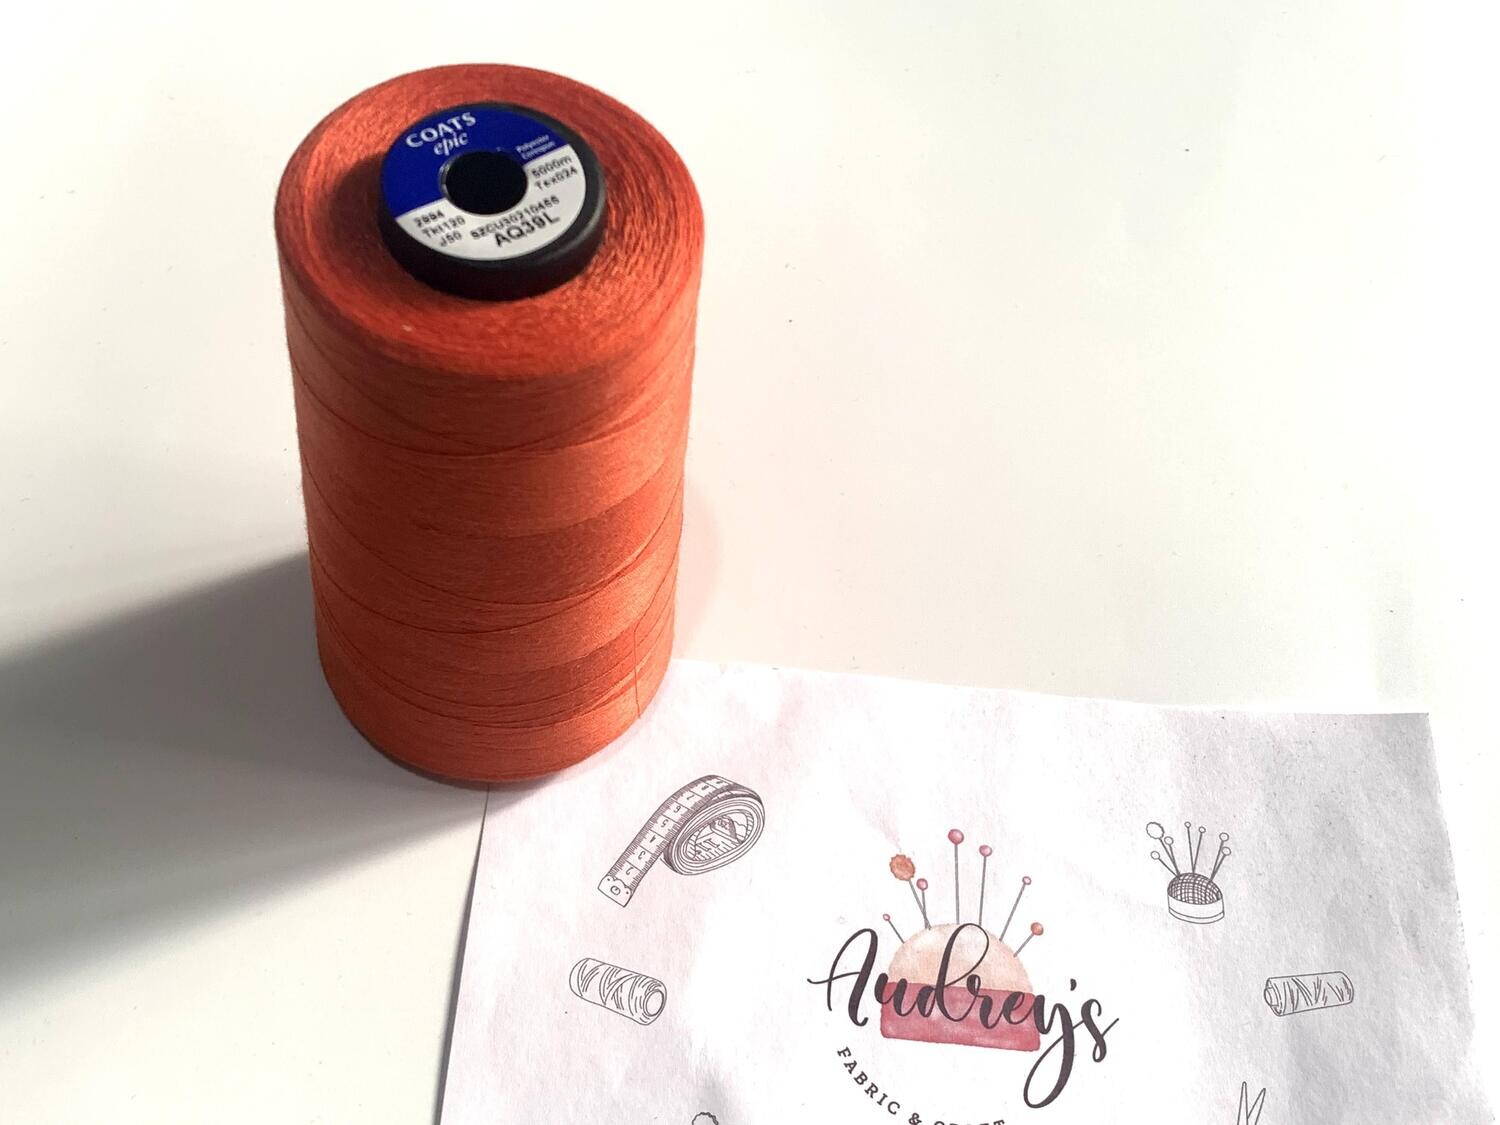 Coats Epic 120 Sewing Thread | AD39L (Fire Red) | 5000m Spool